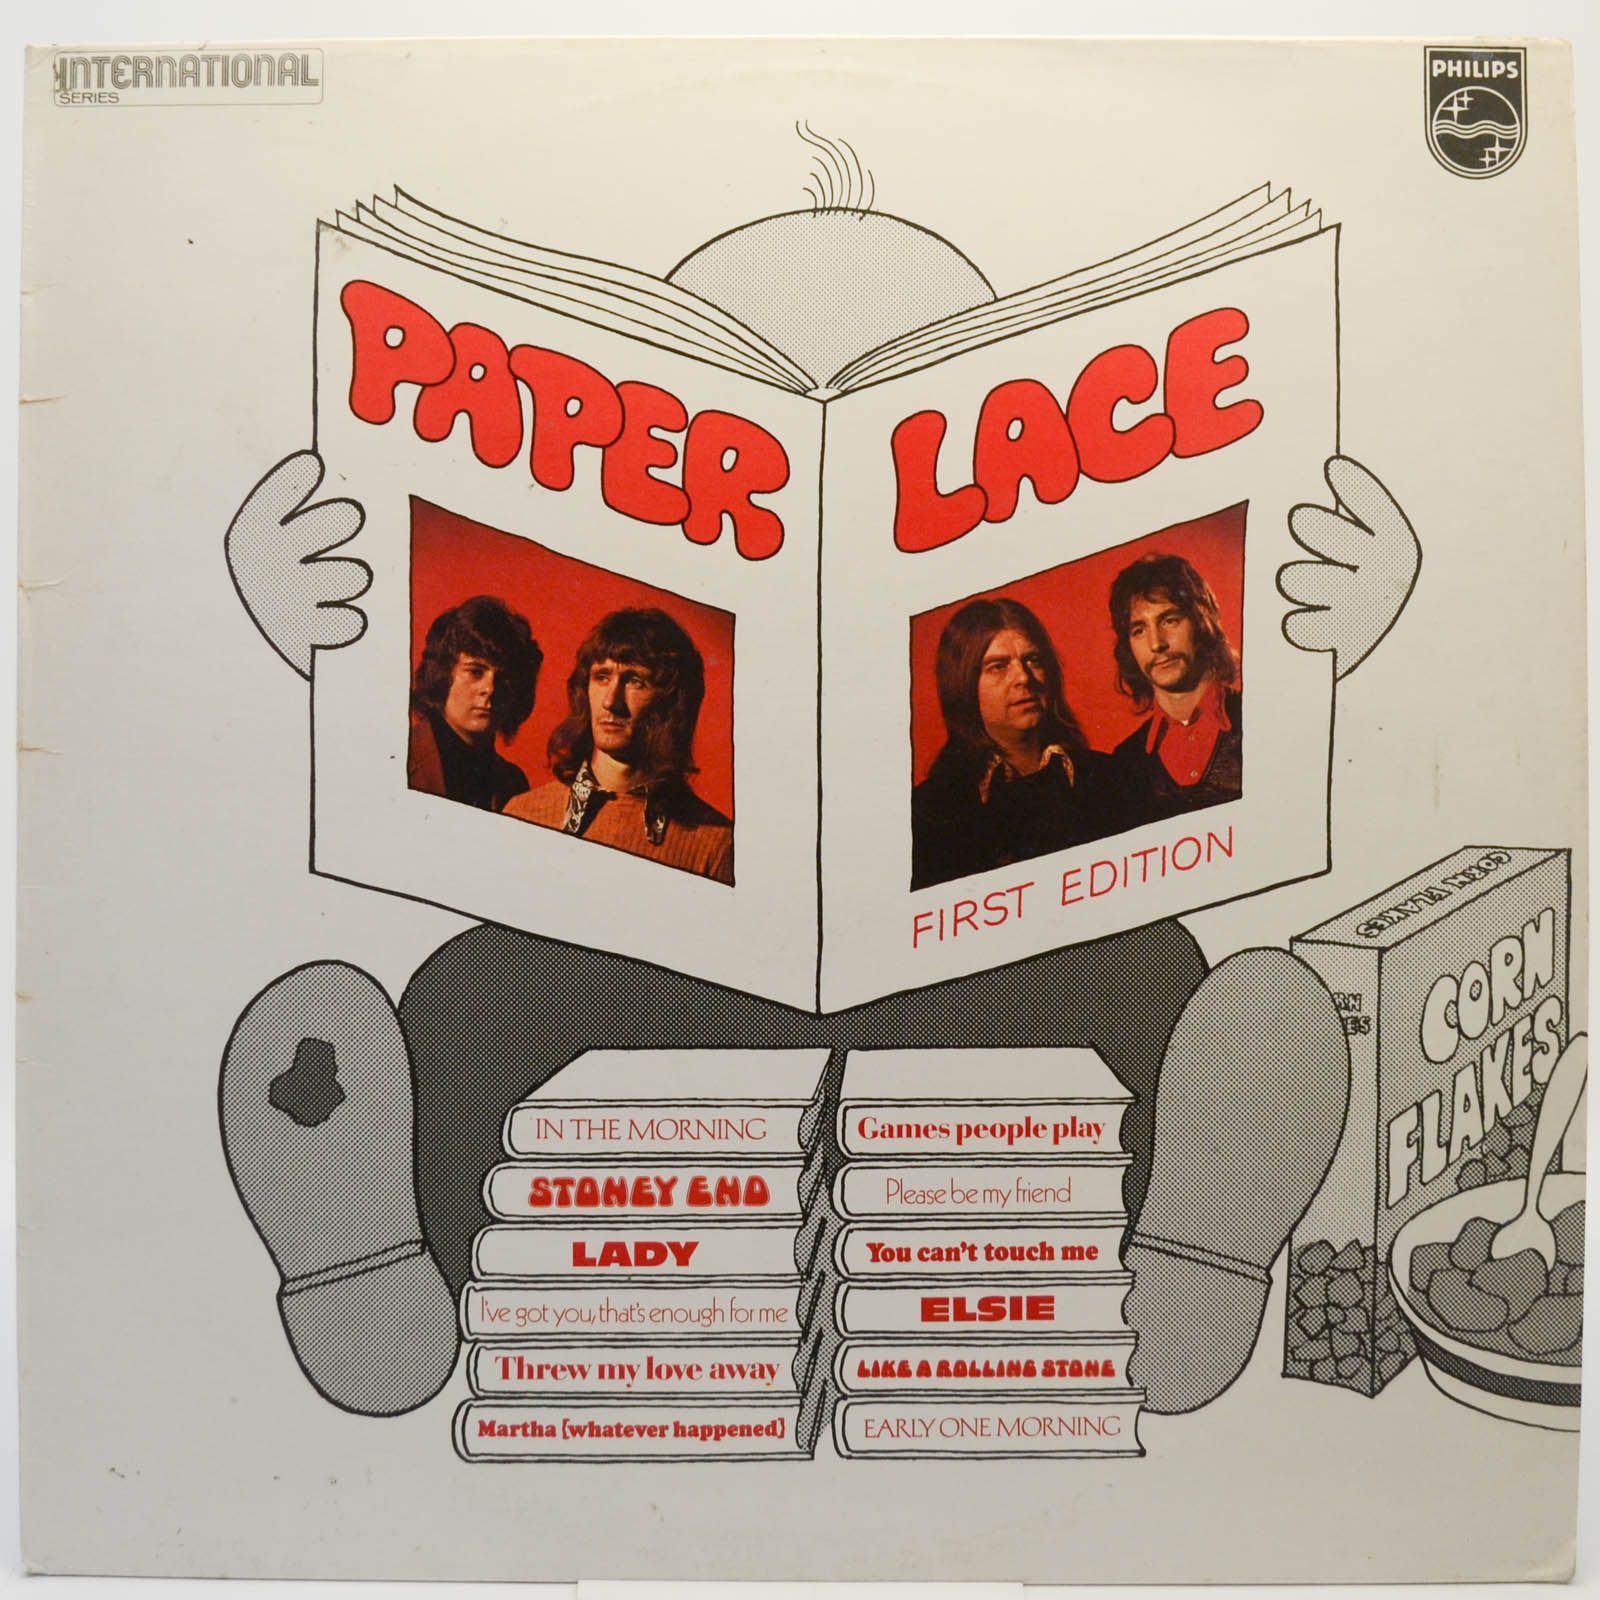 Paper Lace — First Edition (1-st, UK), 1972